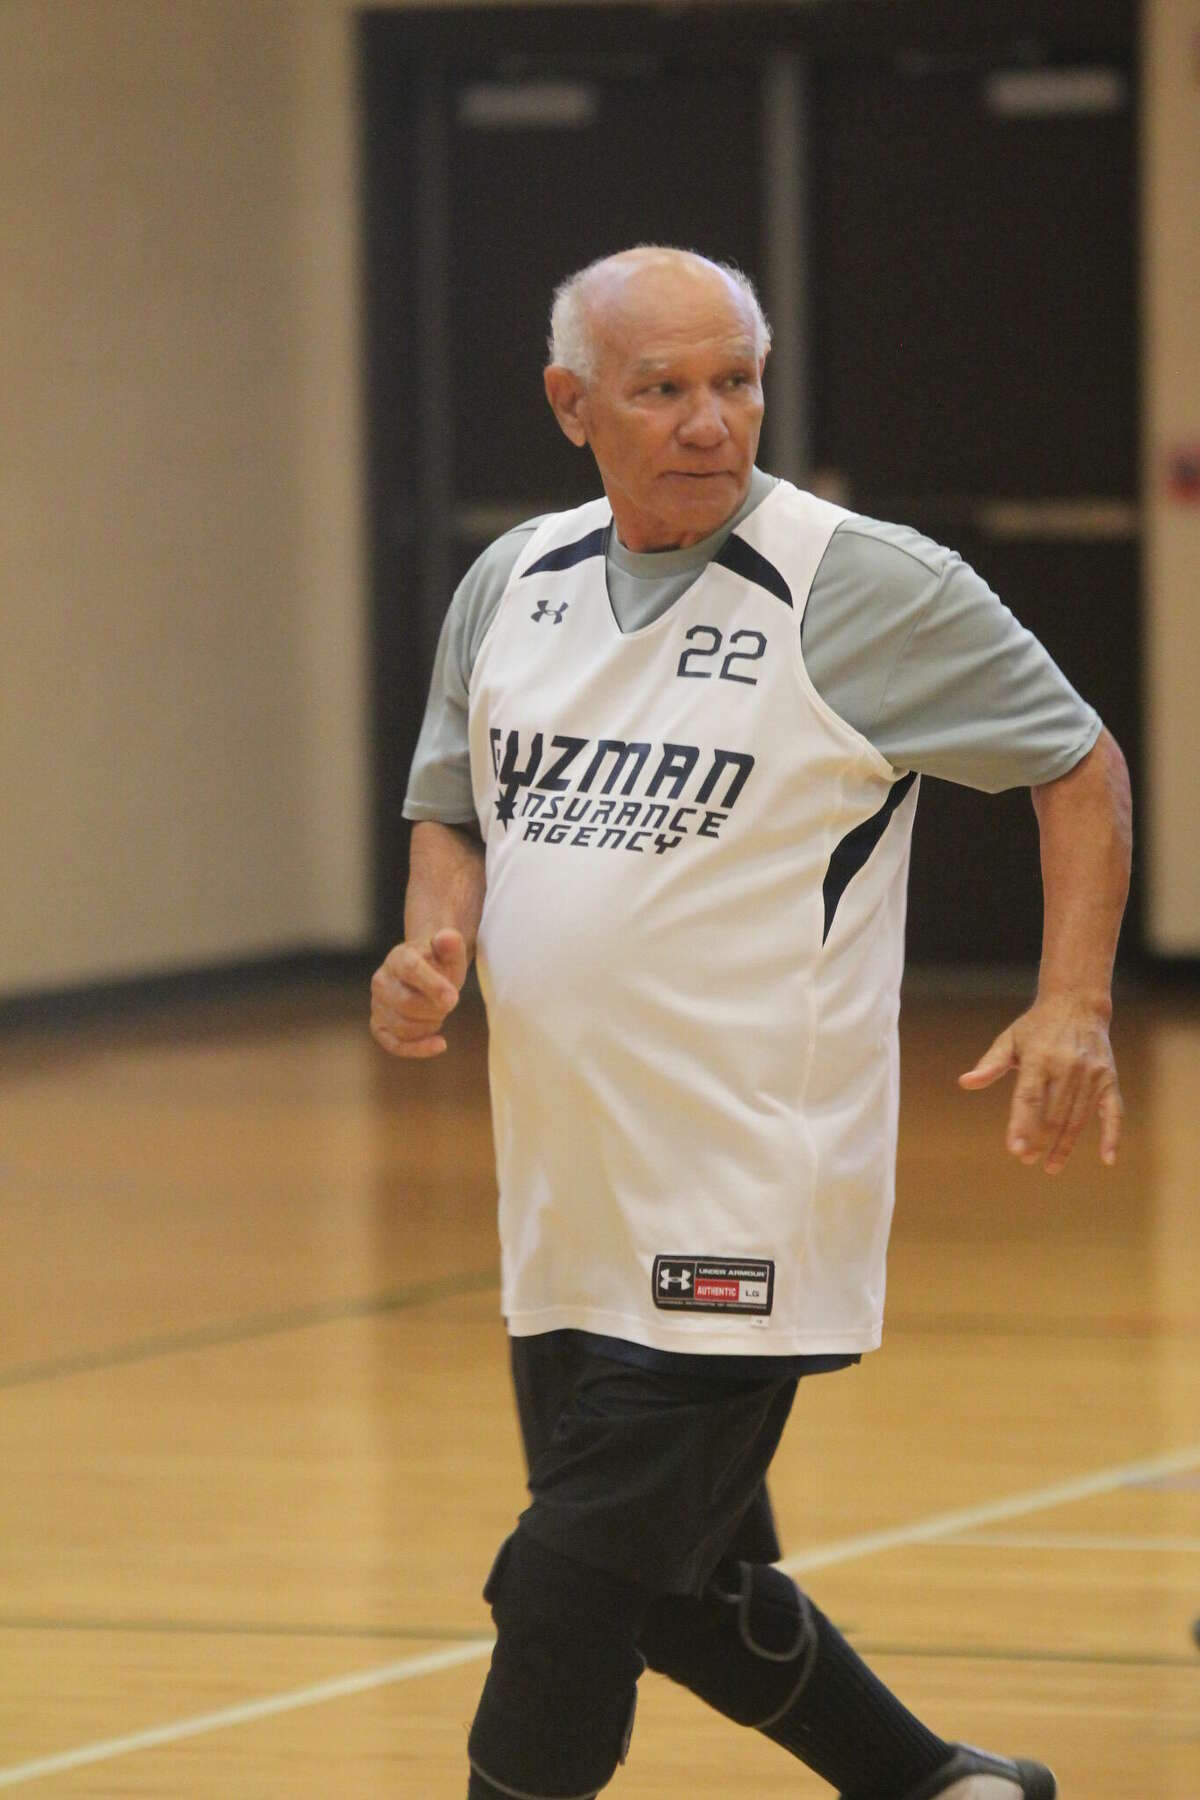 At 78 years old, George Gutierrez continues to do what he loves: playing basketball.